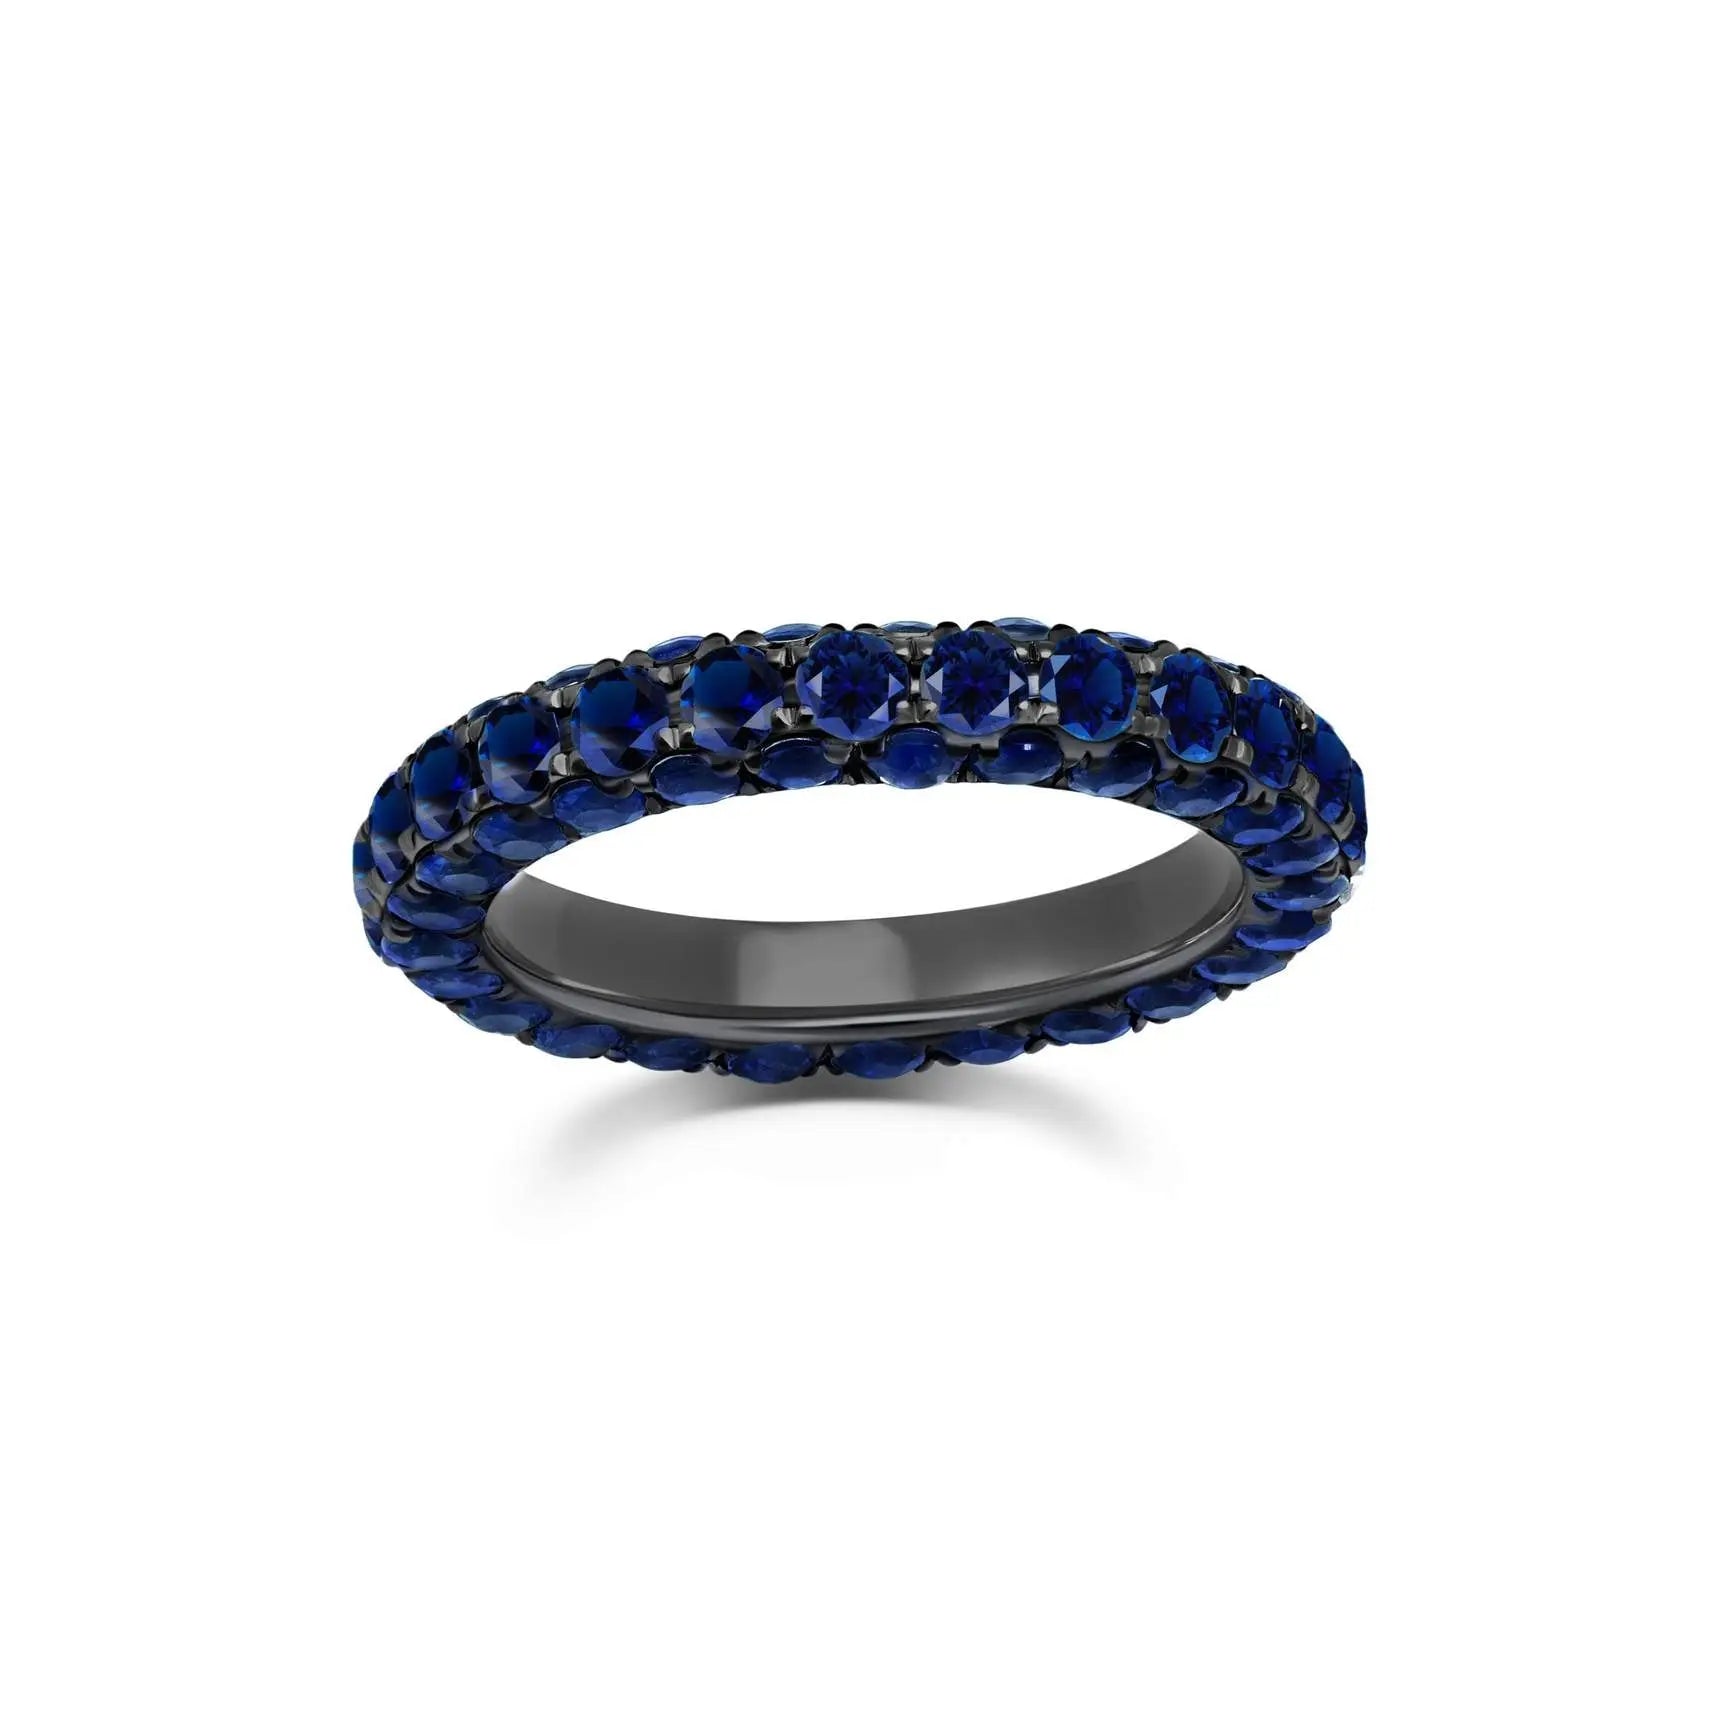 18K Gold with 5.28 Carats of Blue Sapphires  Measurements: 3mm Wide Ring Size 7  If you need a different size, please email shop@sbvail.com  Designed by Graziela Gems